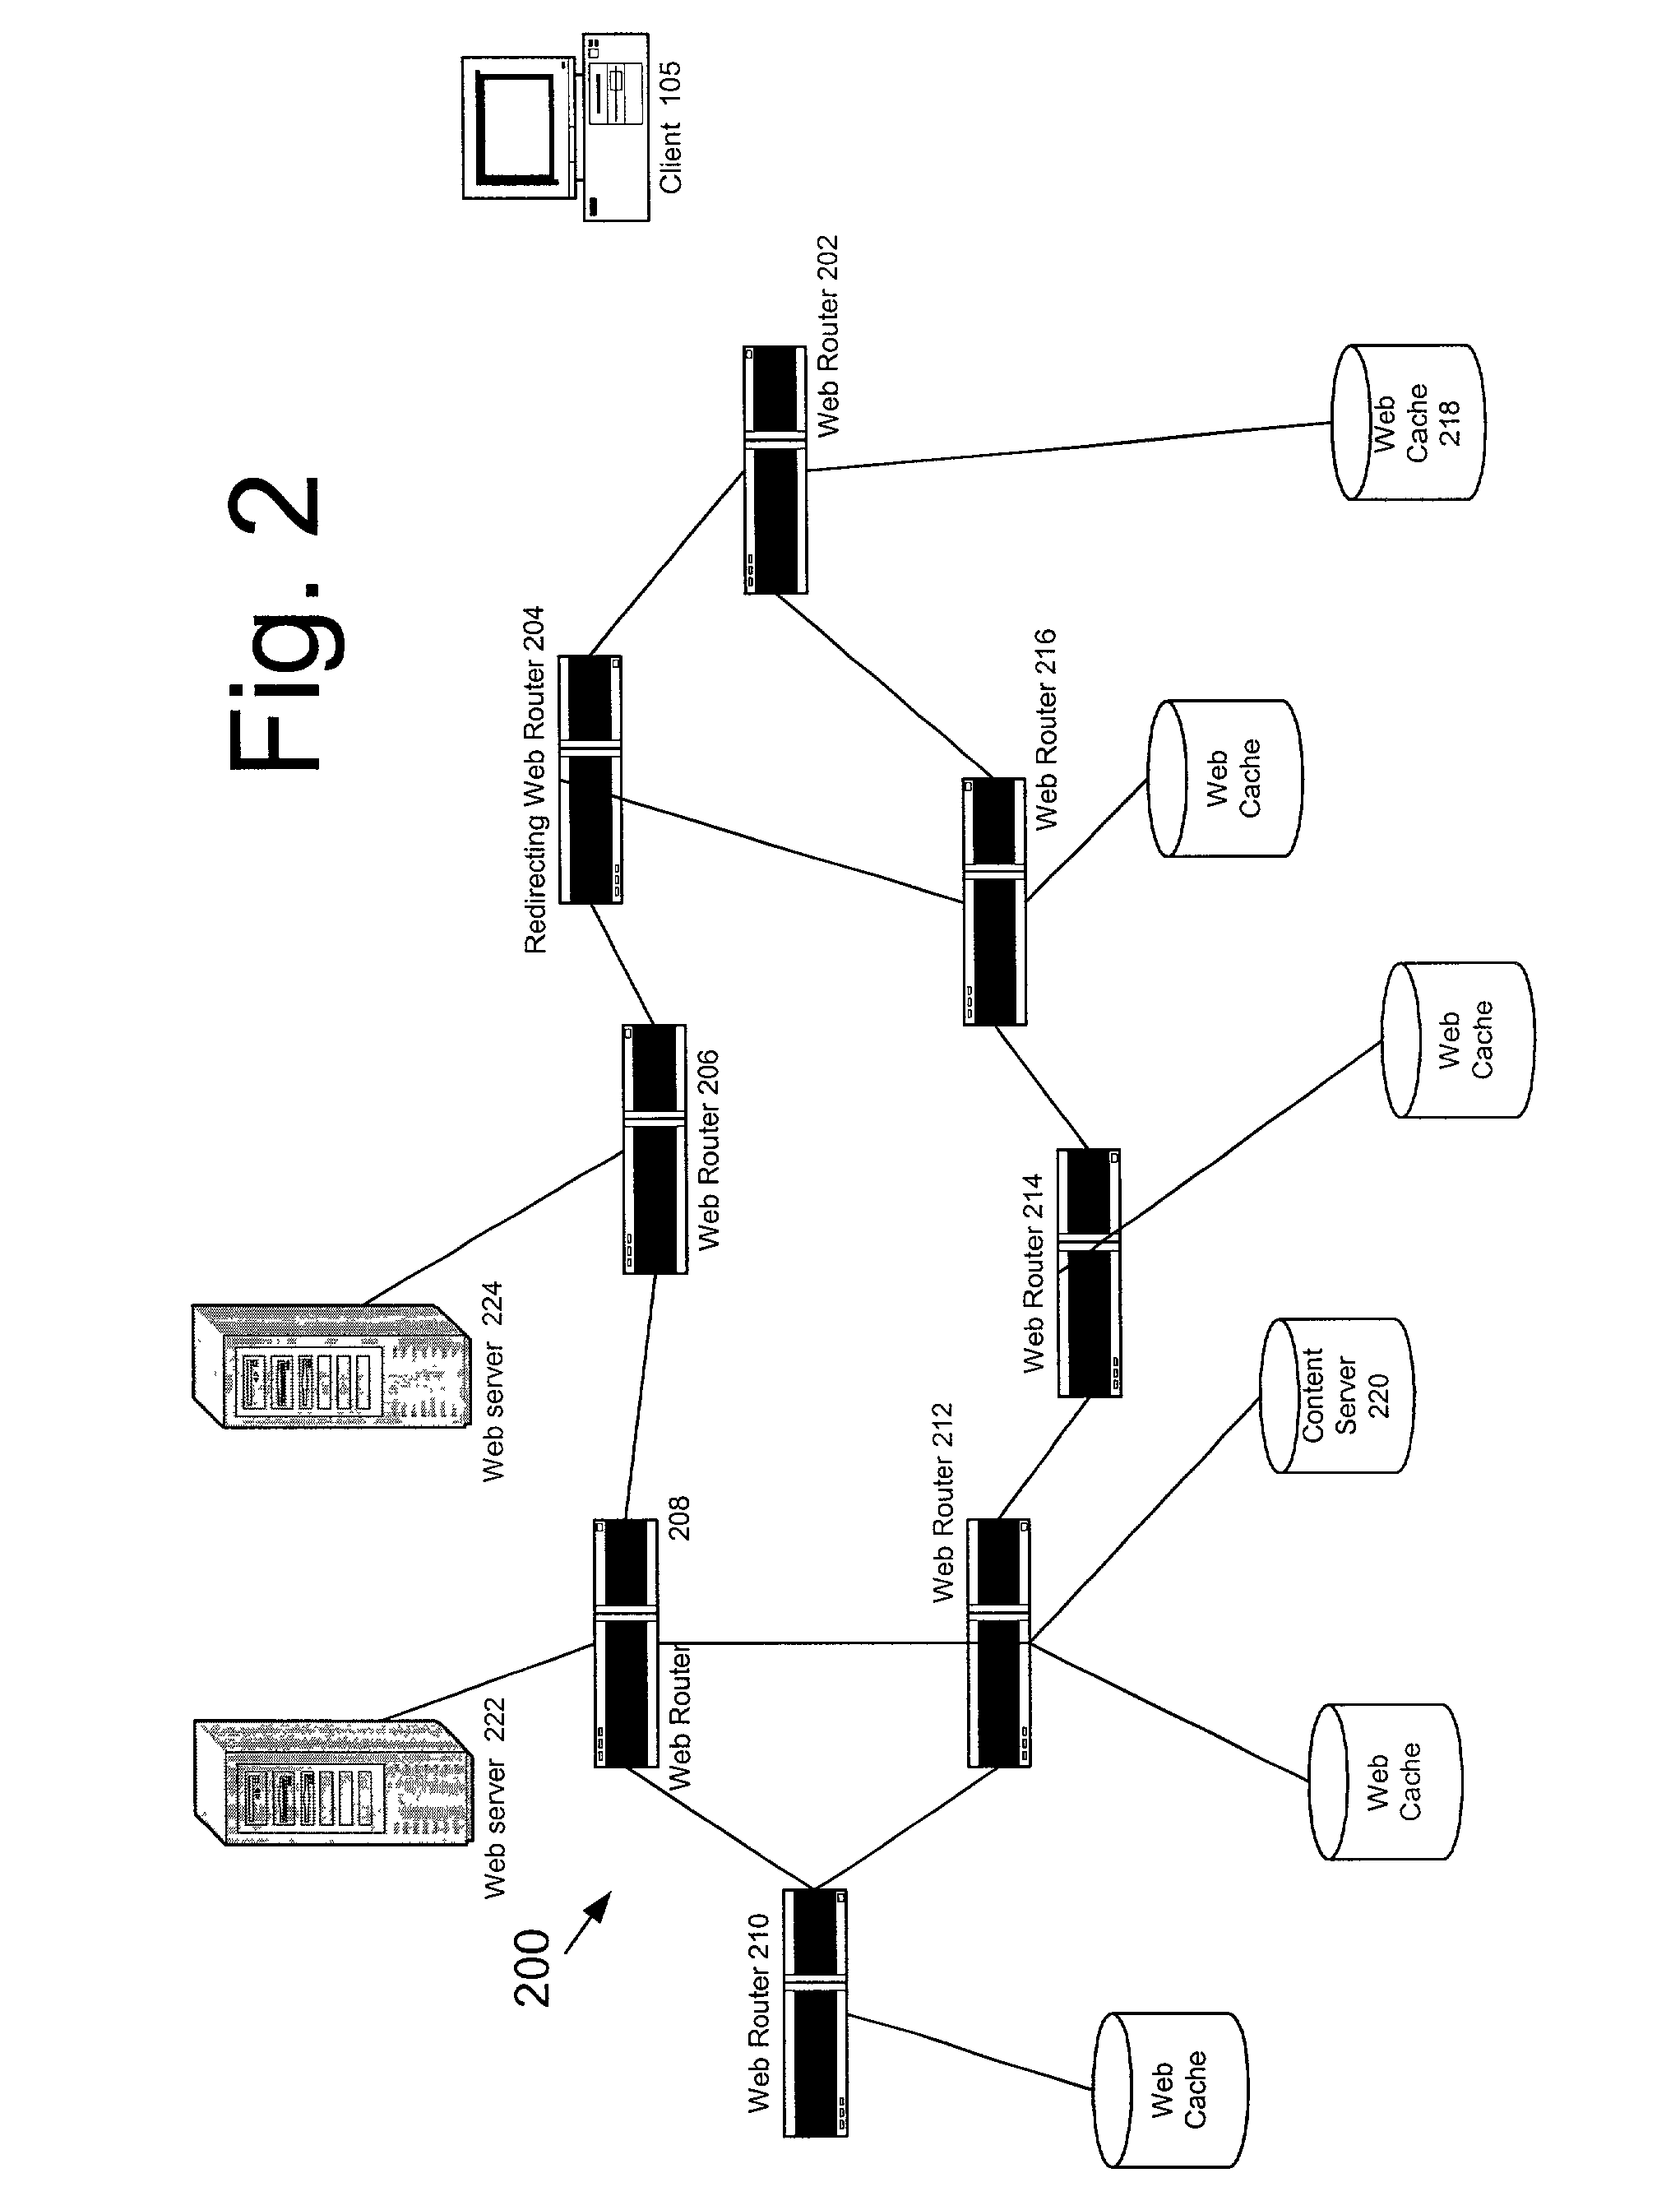 System and method for resolving network layer anycast addresses to network layer unicast addresses